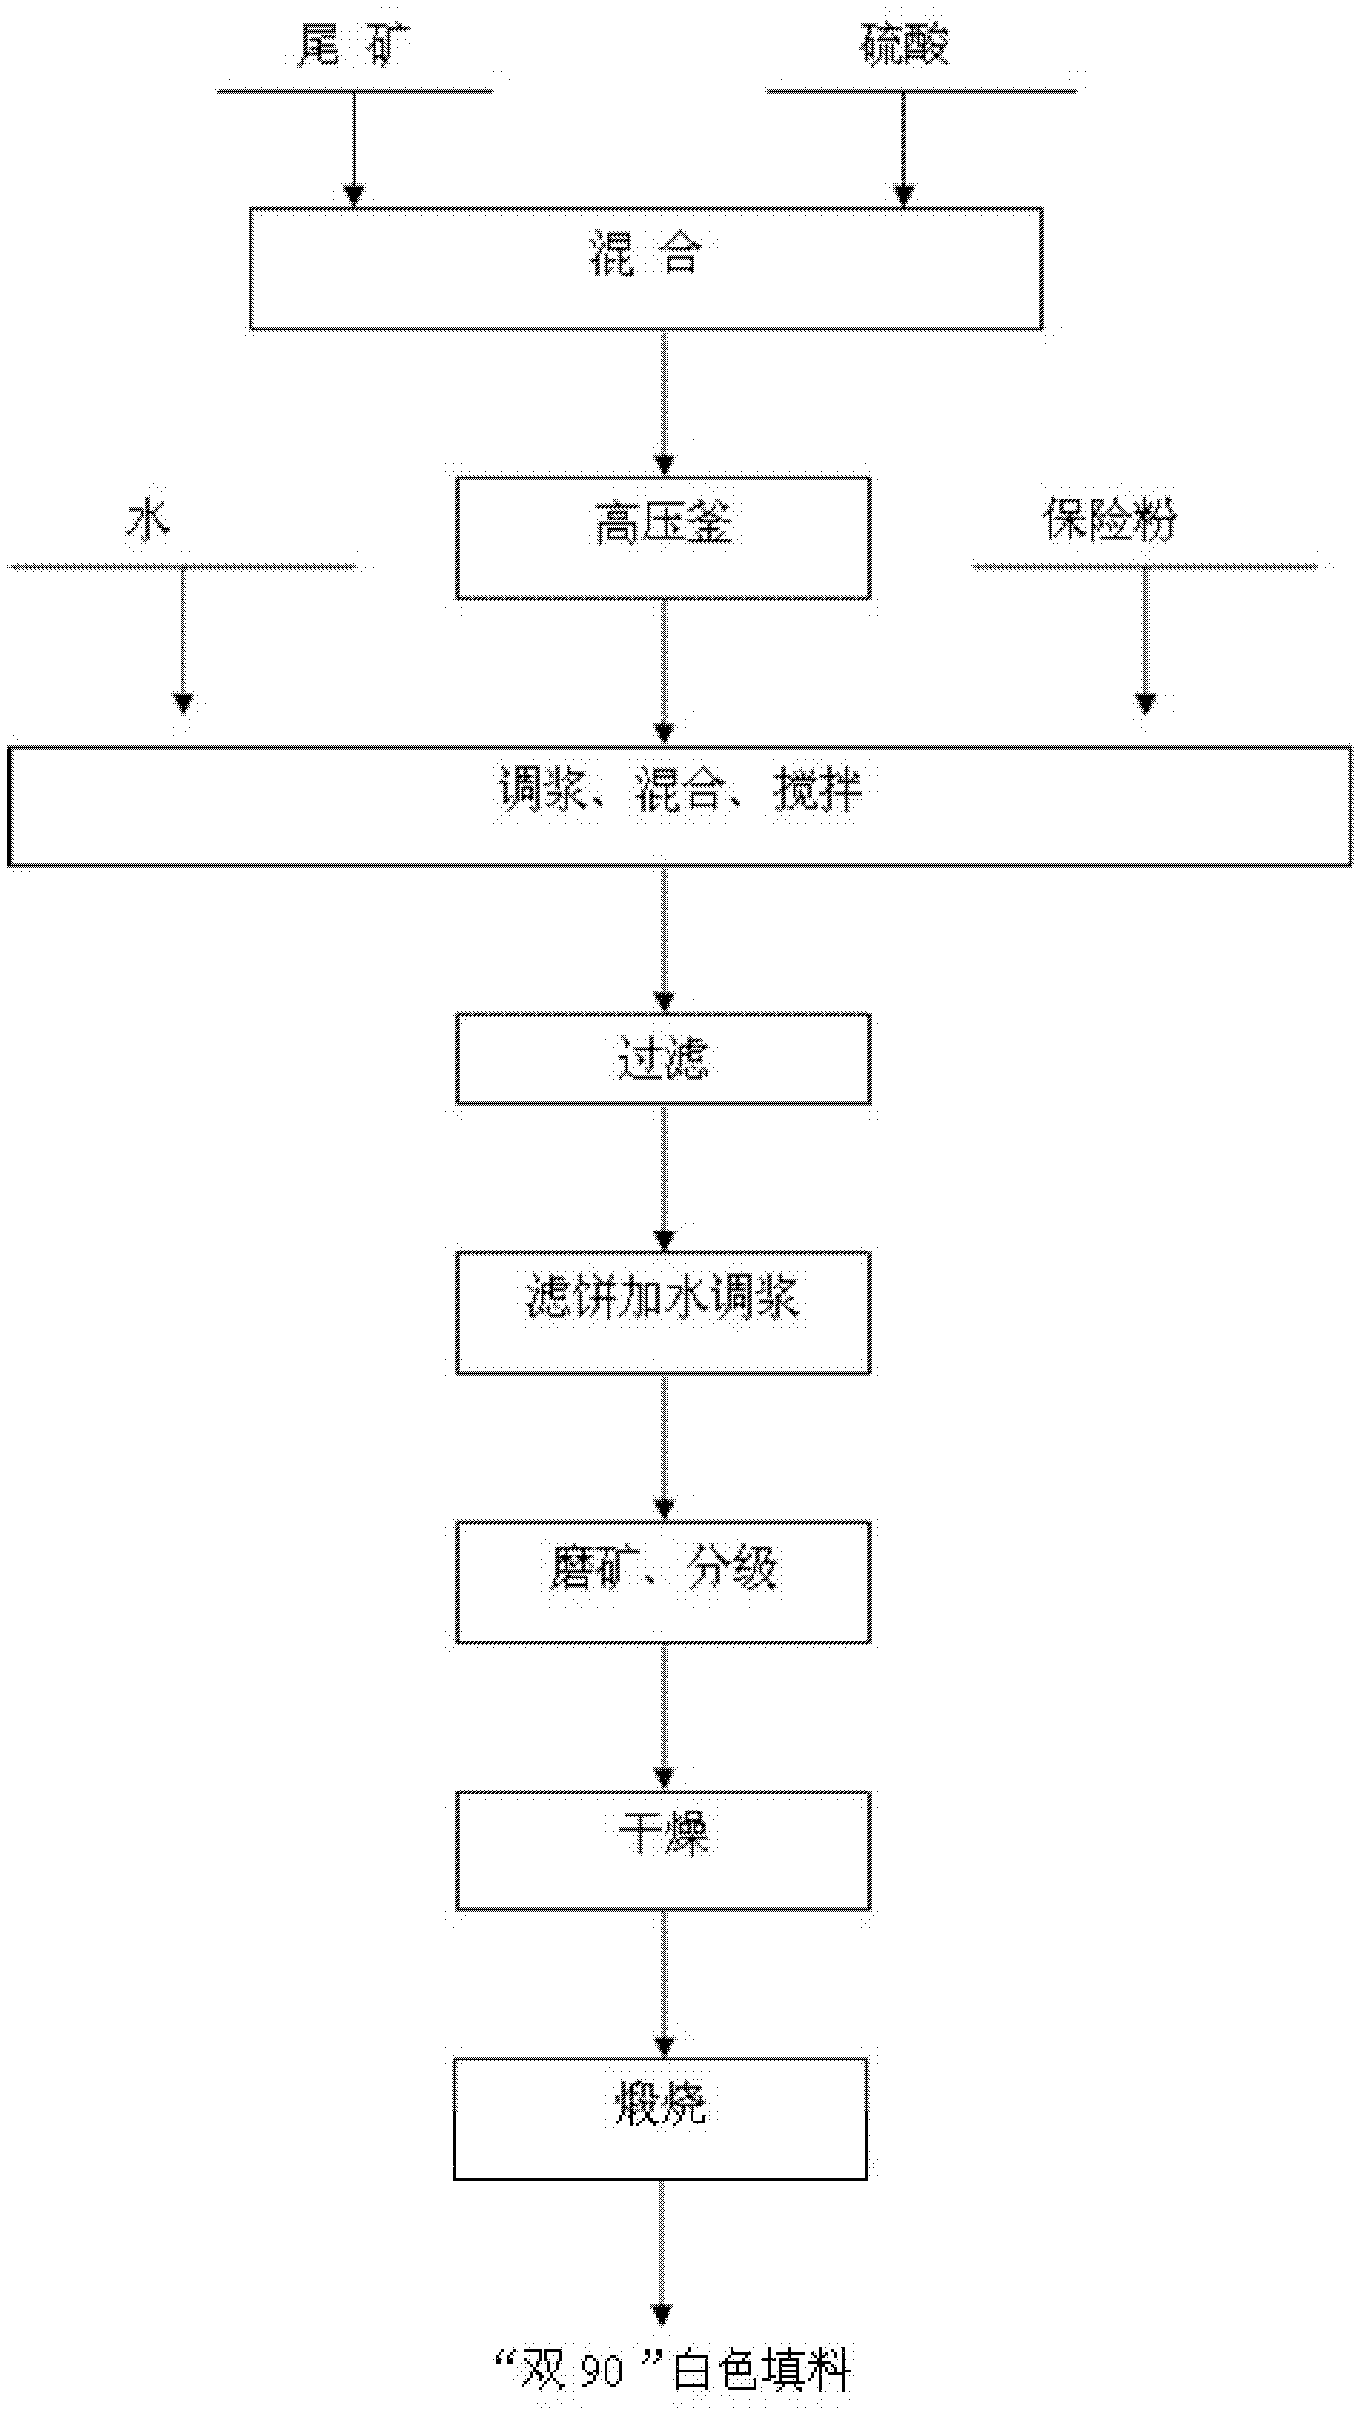 Method for preparing double-90 white filler from bauxite tailing